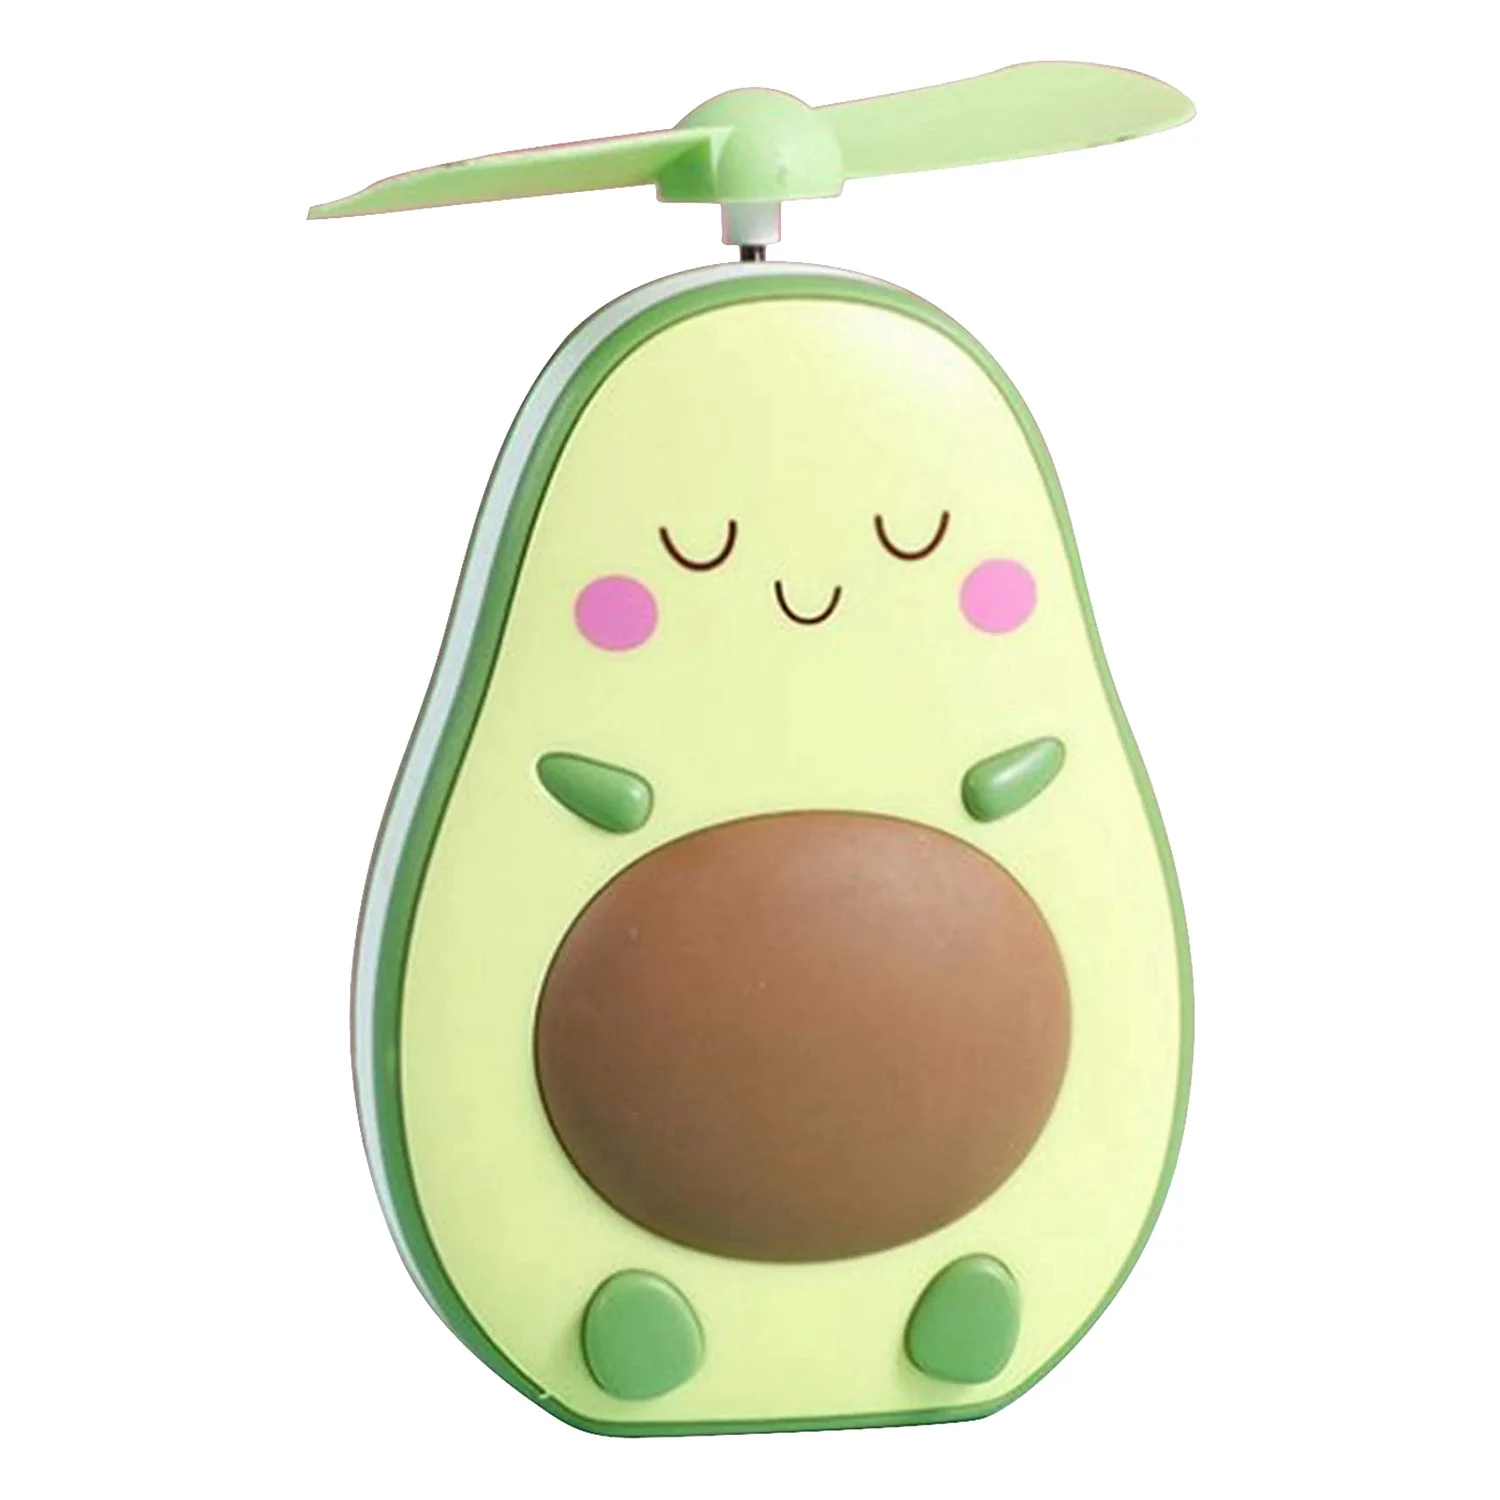 

Mini LED Makeup Mirror and Fan 2 in 1 Integrated Cute Avocado Shaped Practical Portable USB Charging Handheld Fan,Brown